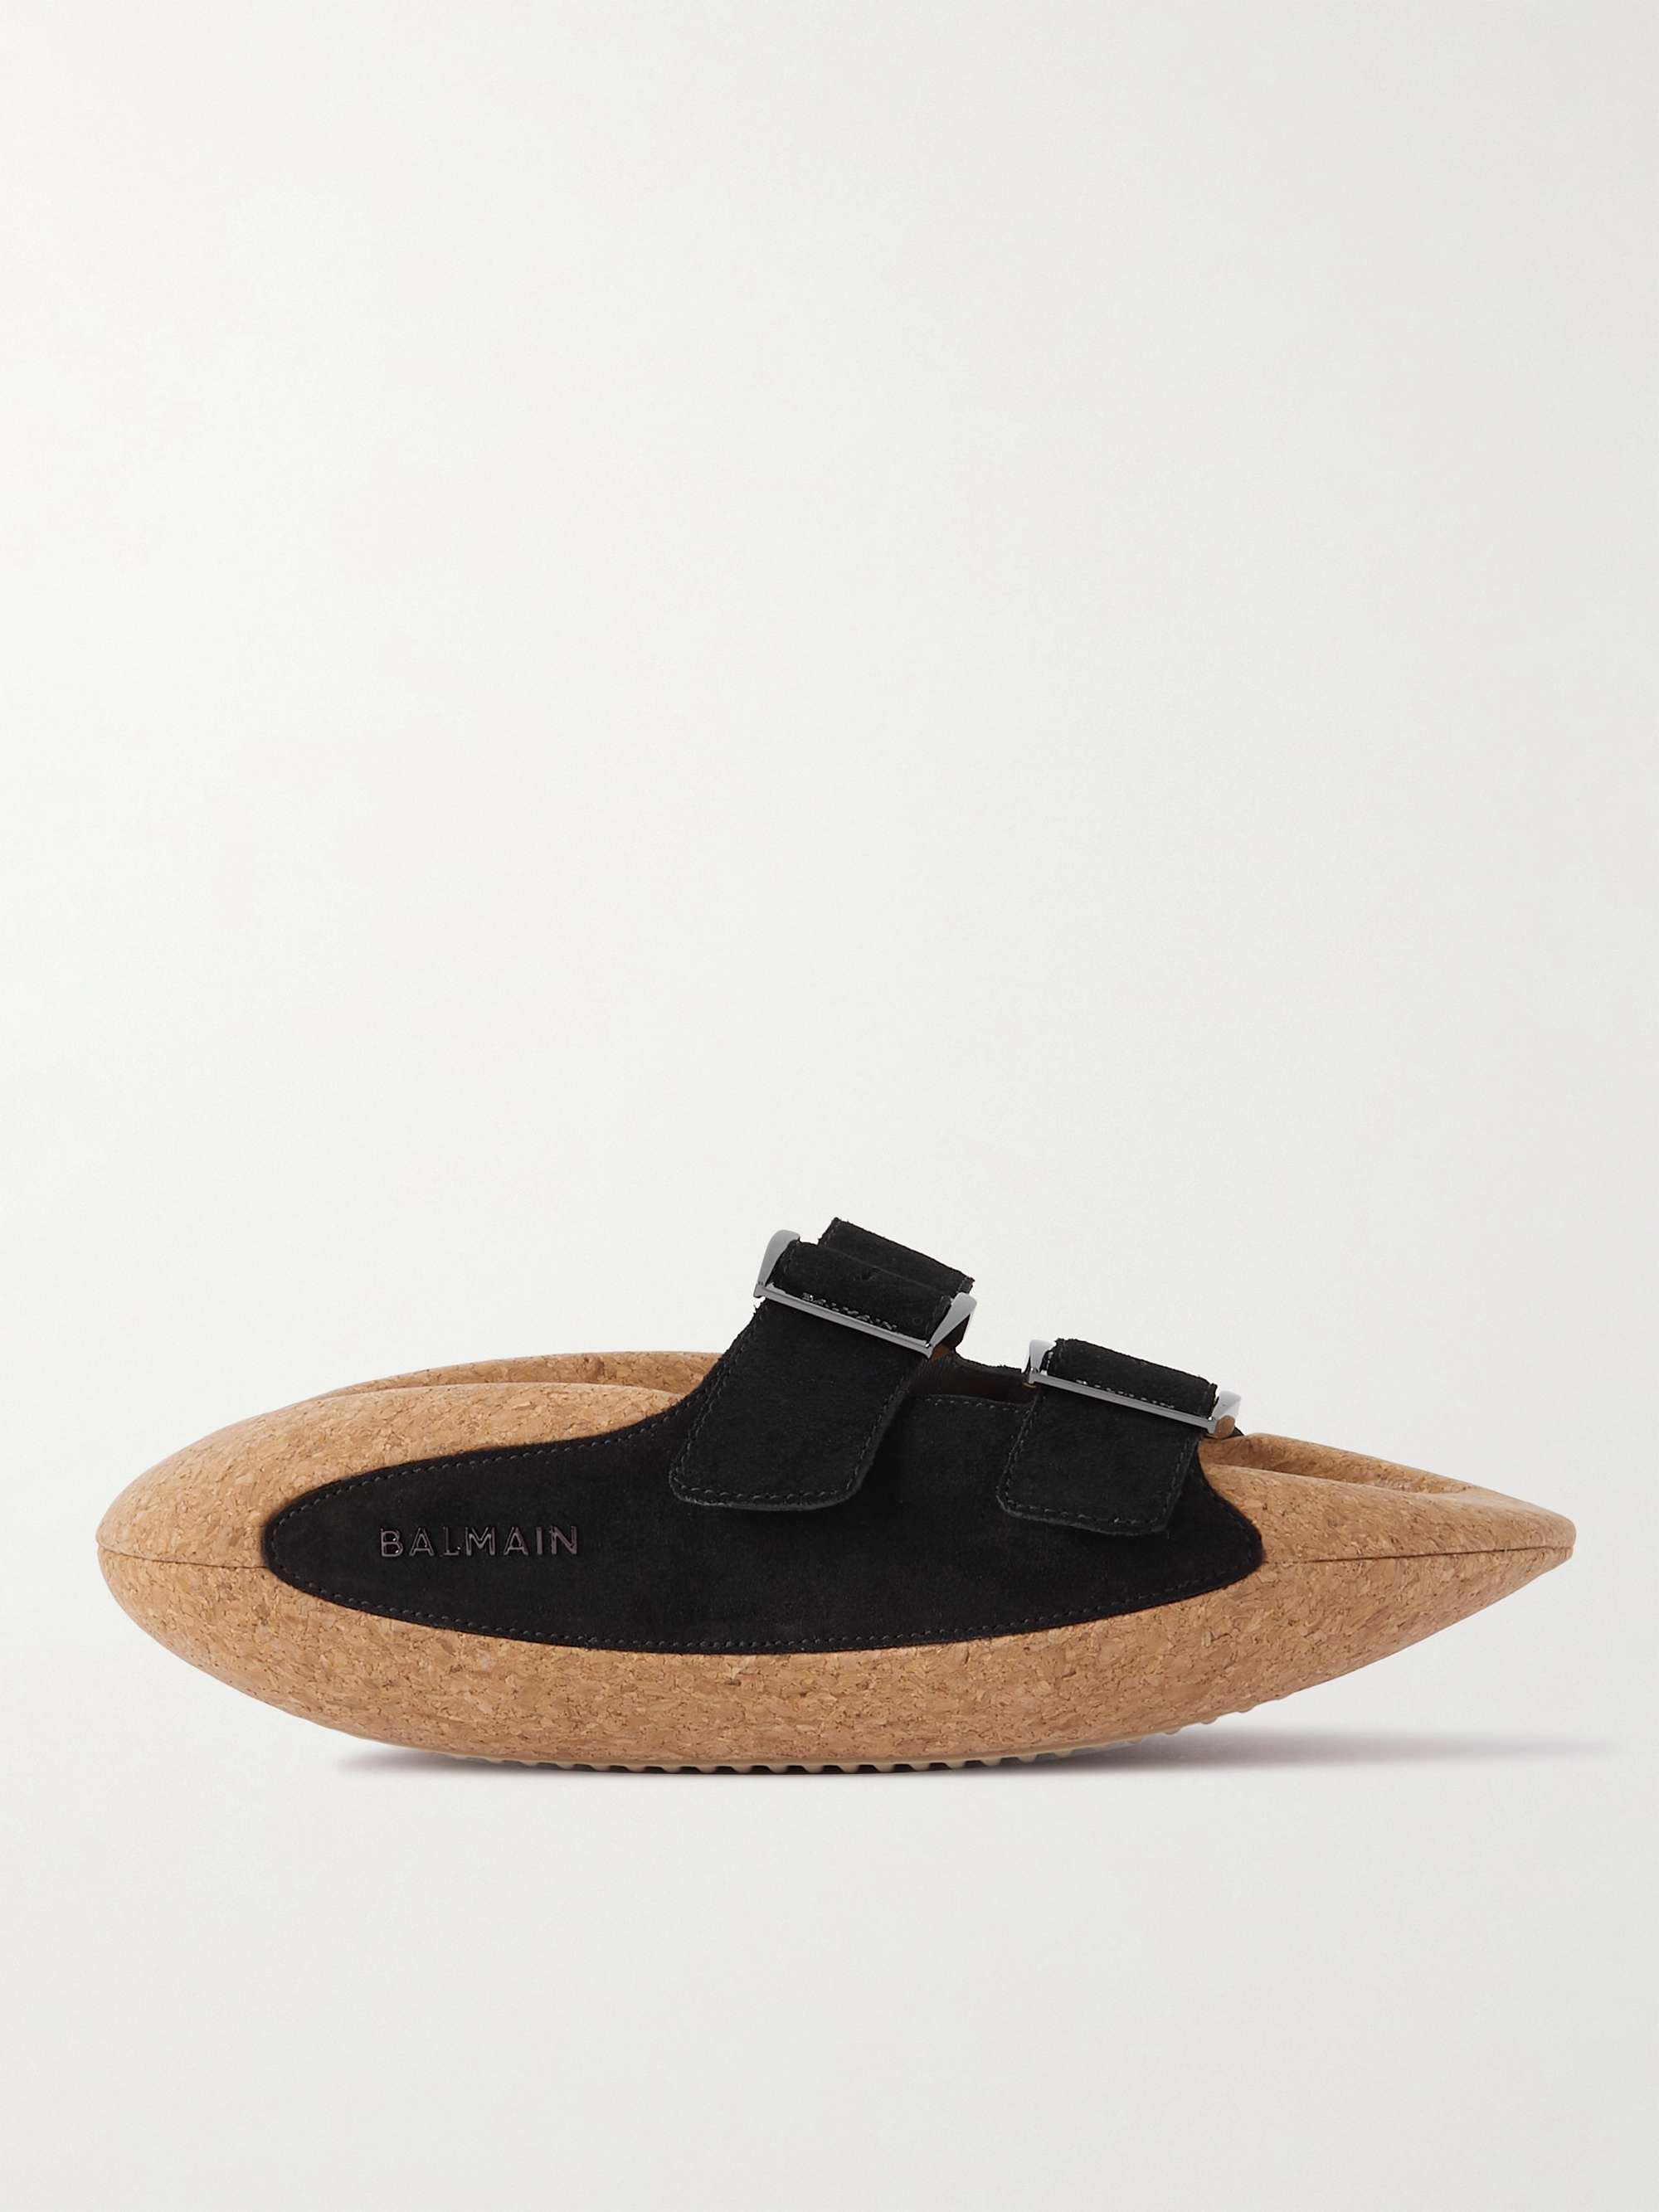 BALMAIN B-It-Puffy Quilted Leather Slides